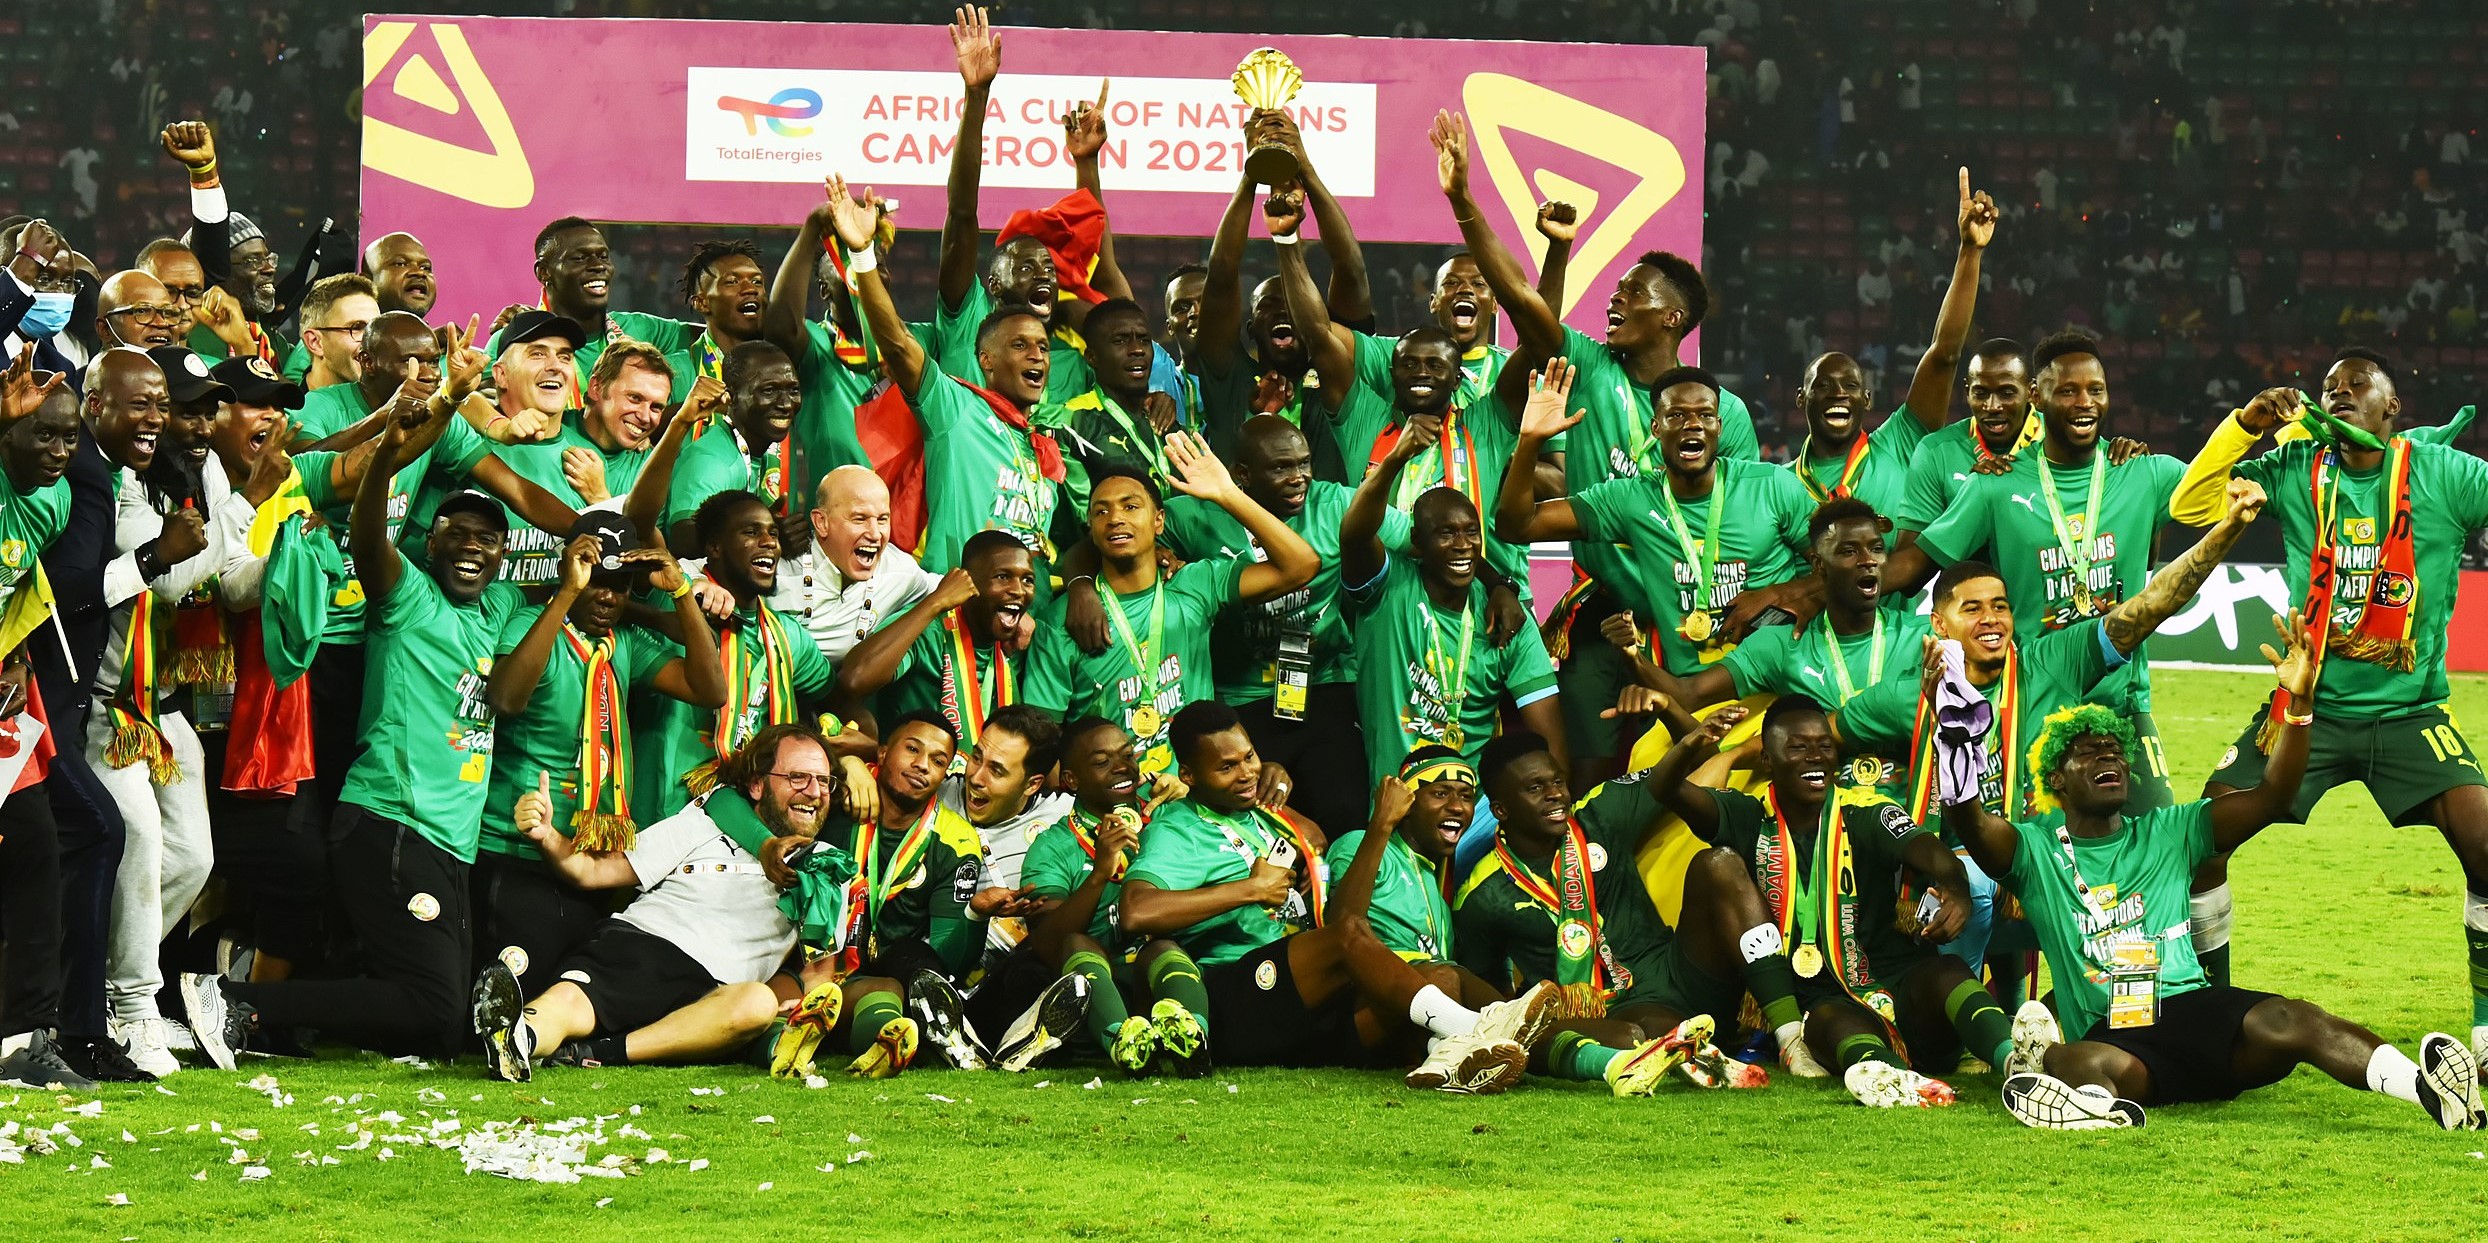 Senegal, winner of the 2021 Africa Cup of Nations